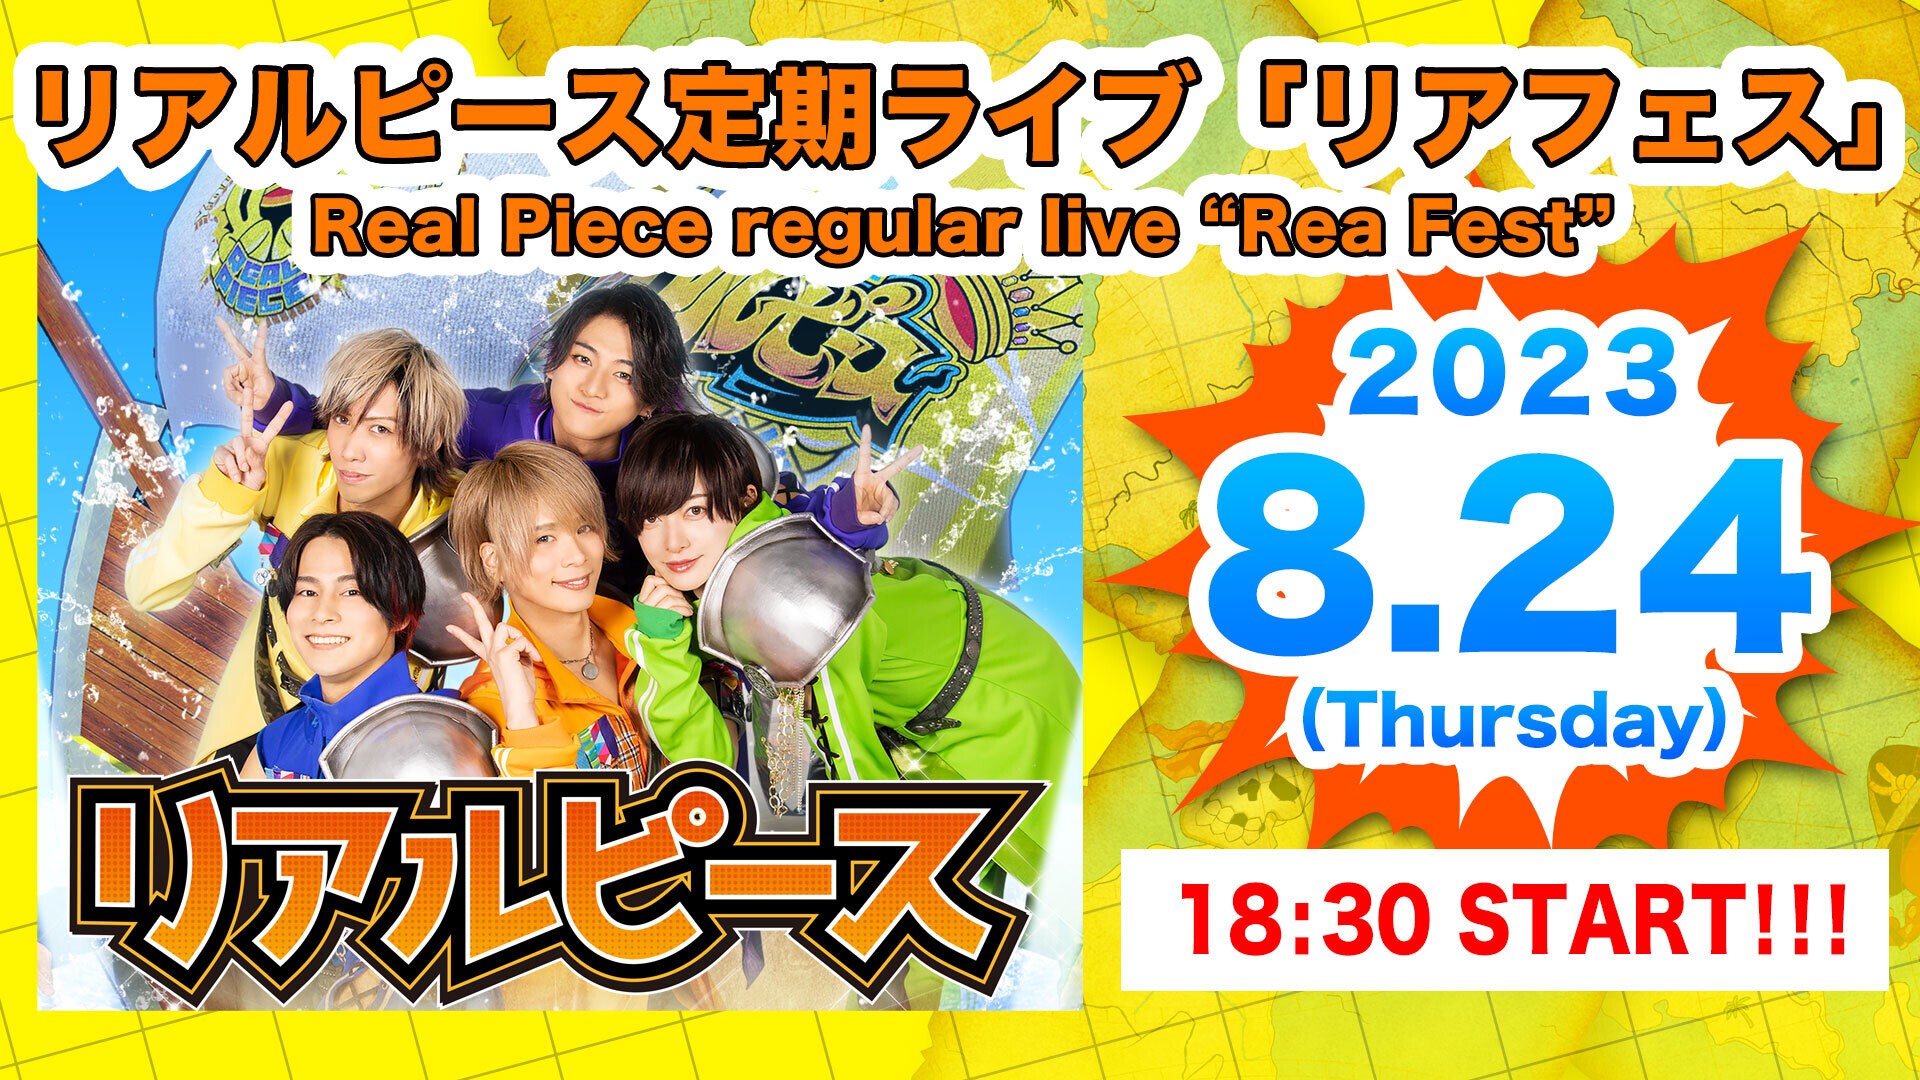 August 24. Real Piece regular live “Rea Fest” | リアルピース / Real Piece